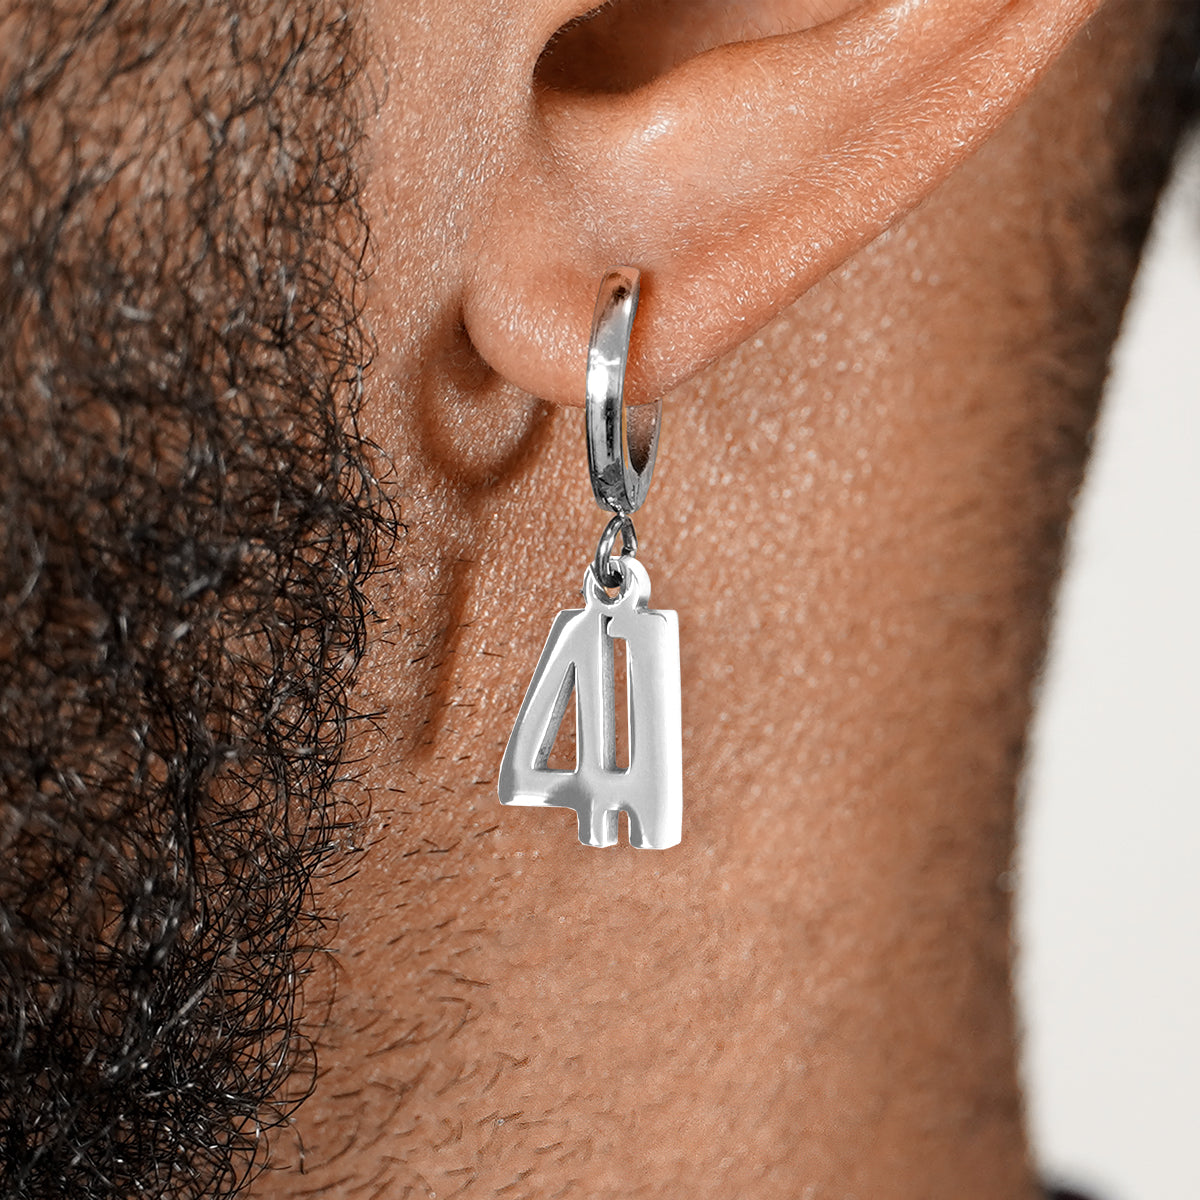 41 Number Earring - Stainless Steel